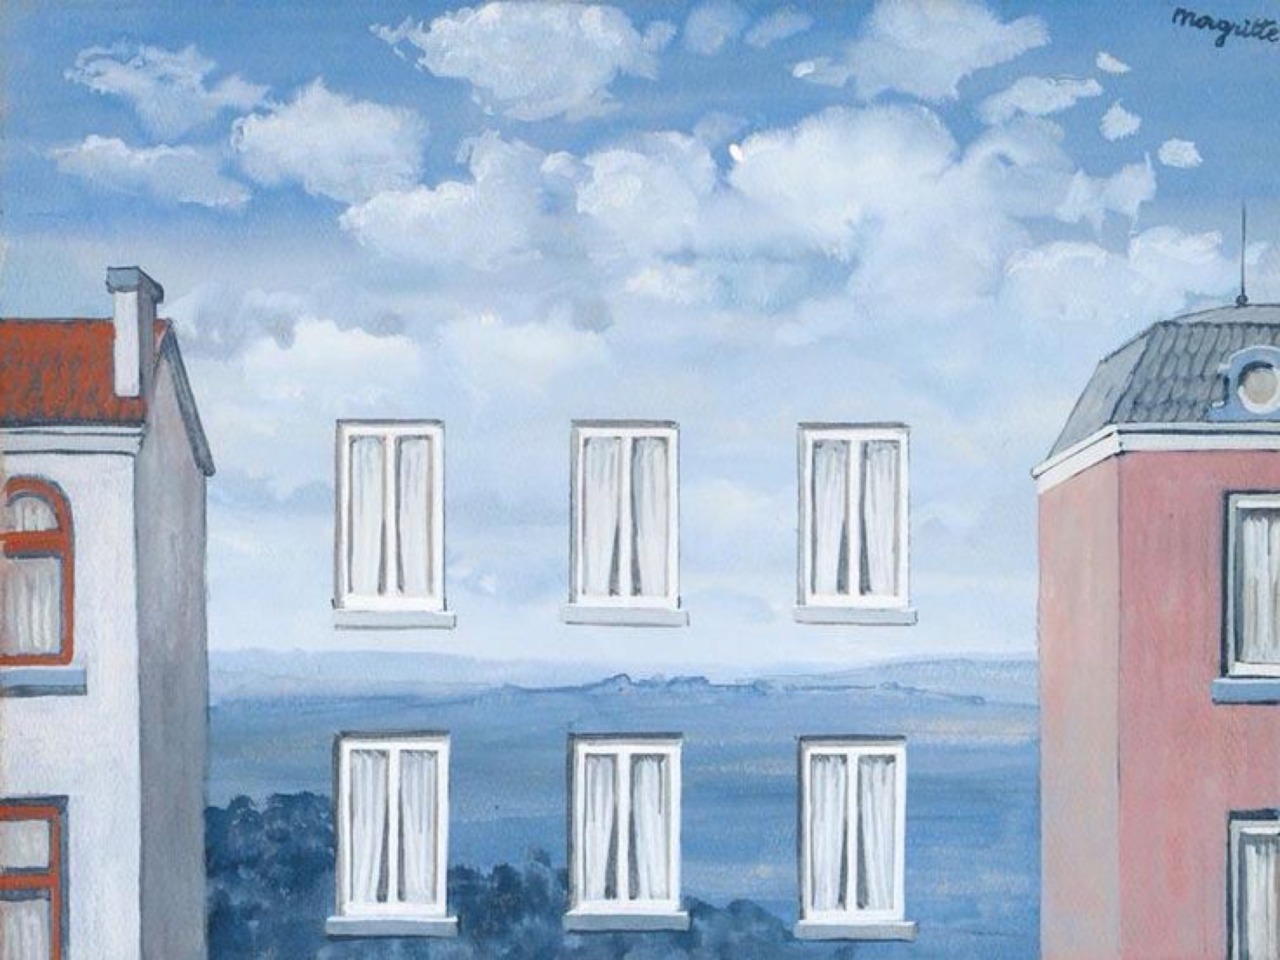 The Waking State by Rene Magritte